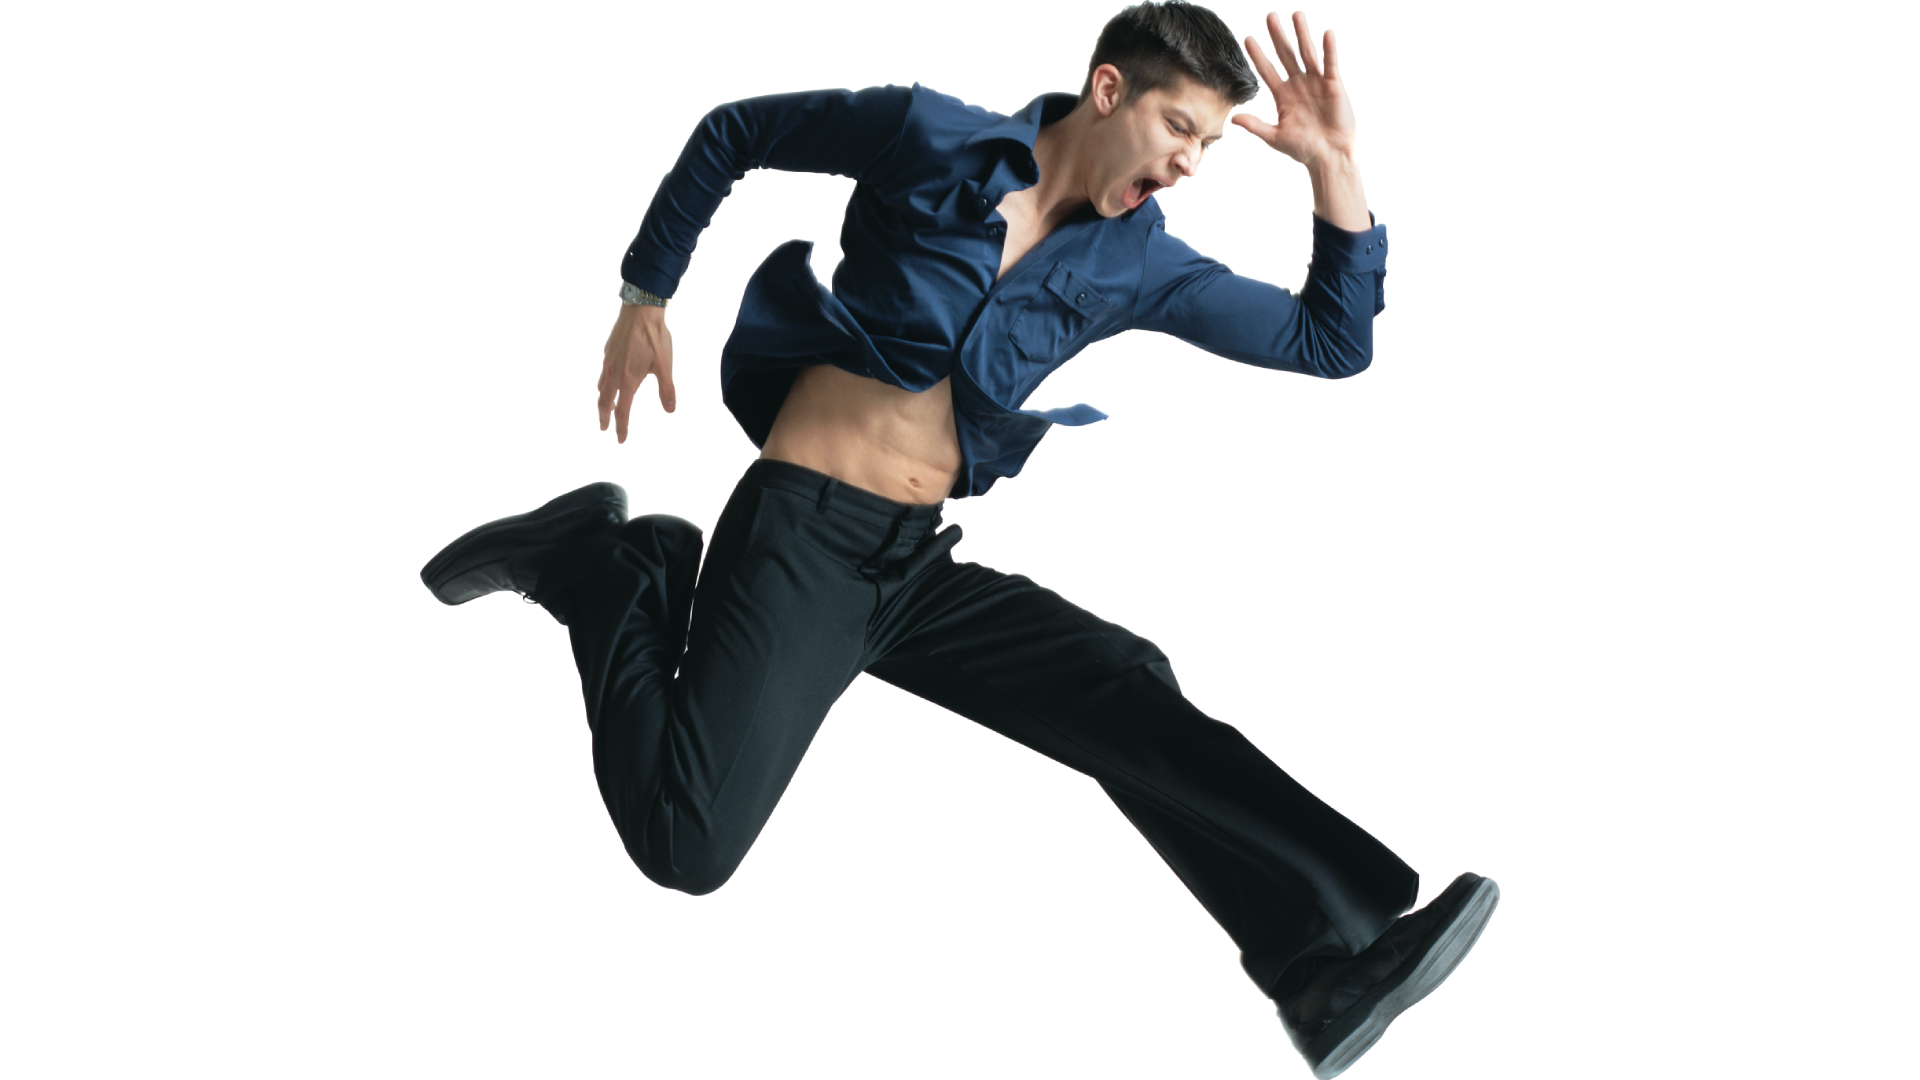  a man jumping in the air with a blue shirt, black pants, and black shoes